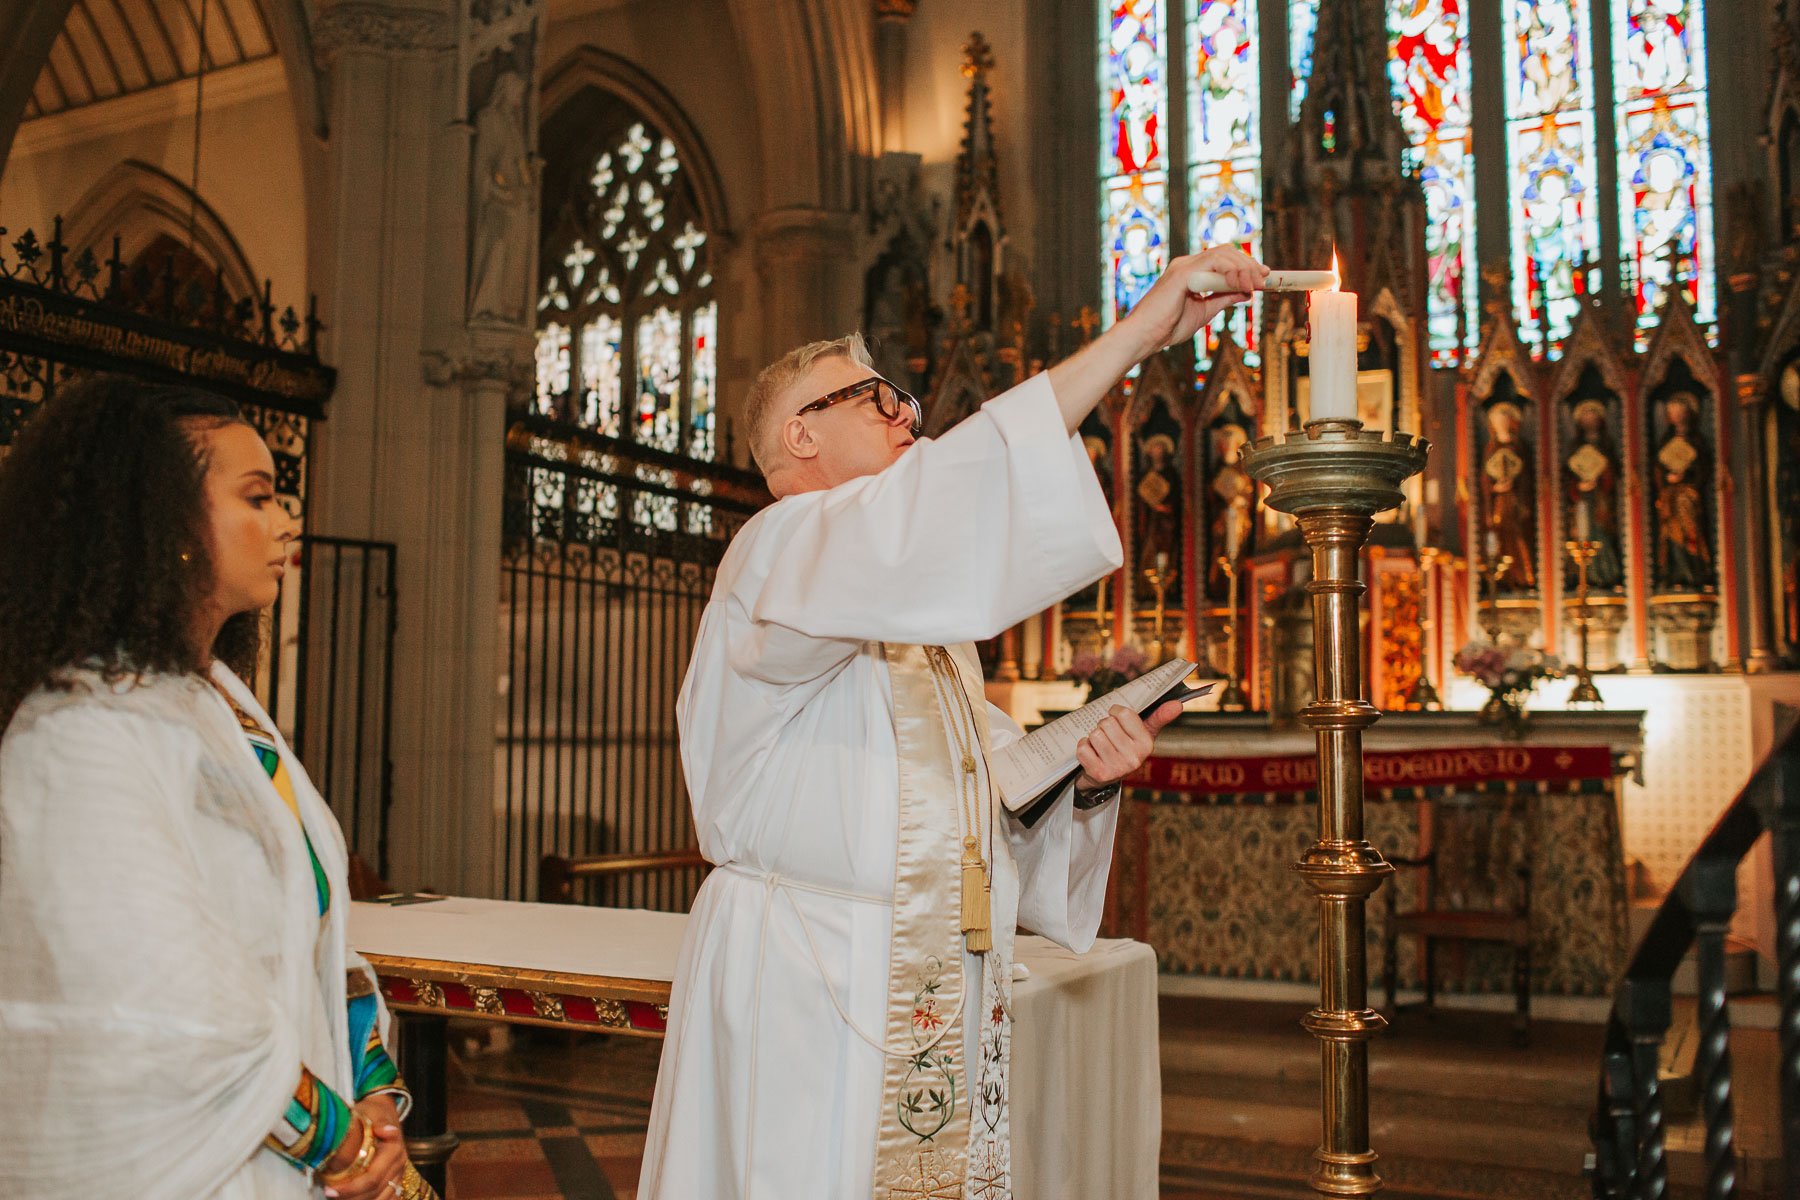 The priest performing a Christening at the St Mary's Roman Catholic Church in Clapham, London.